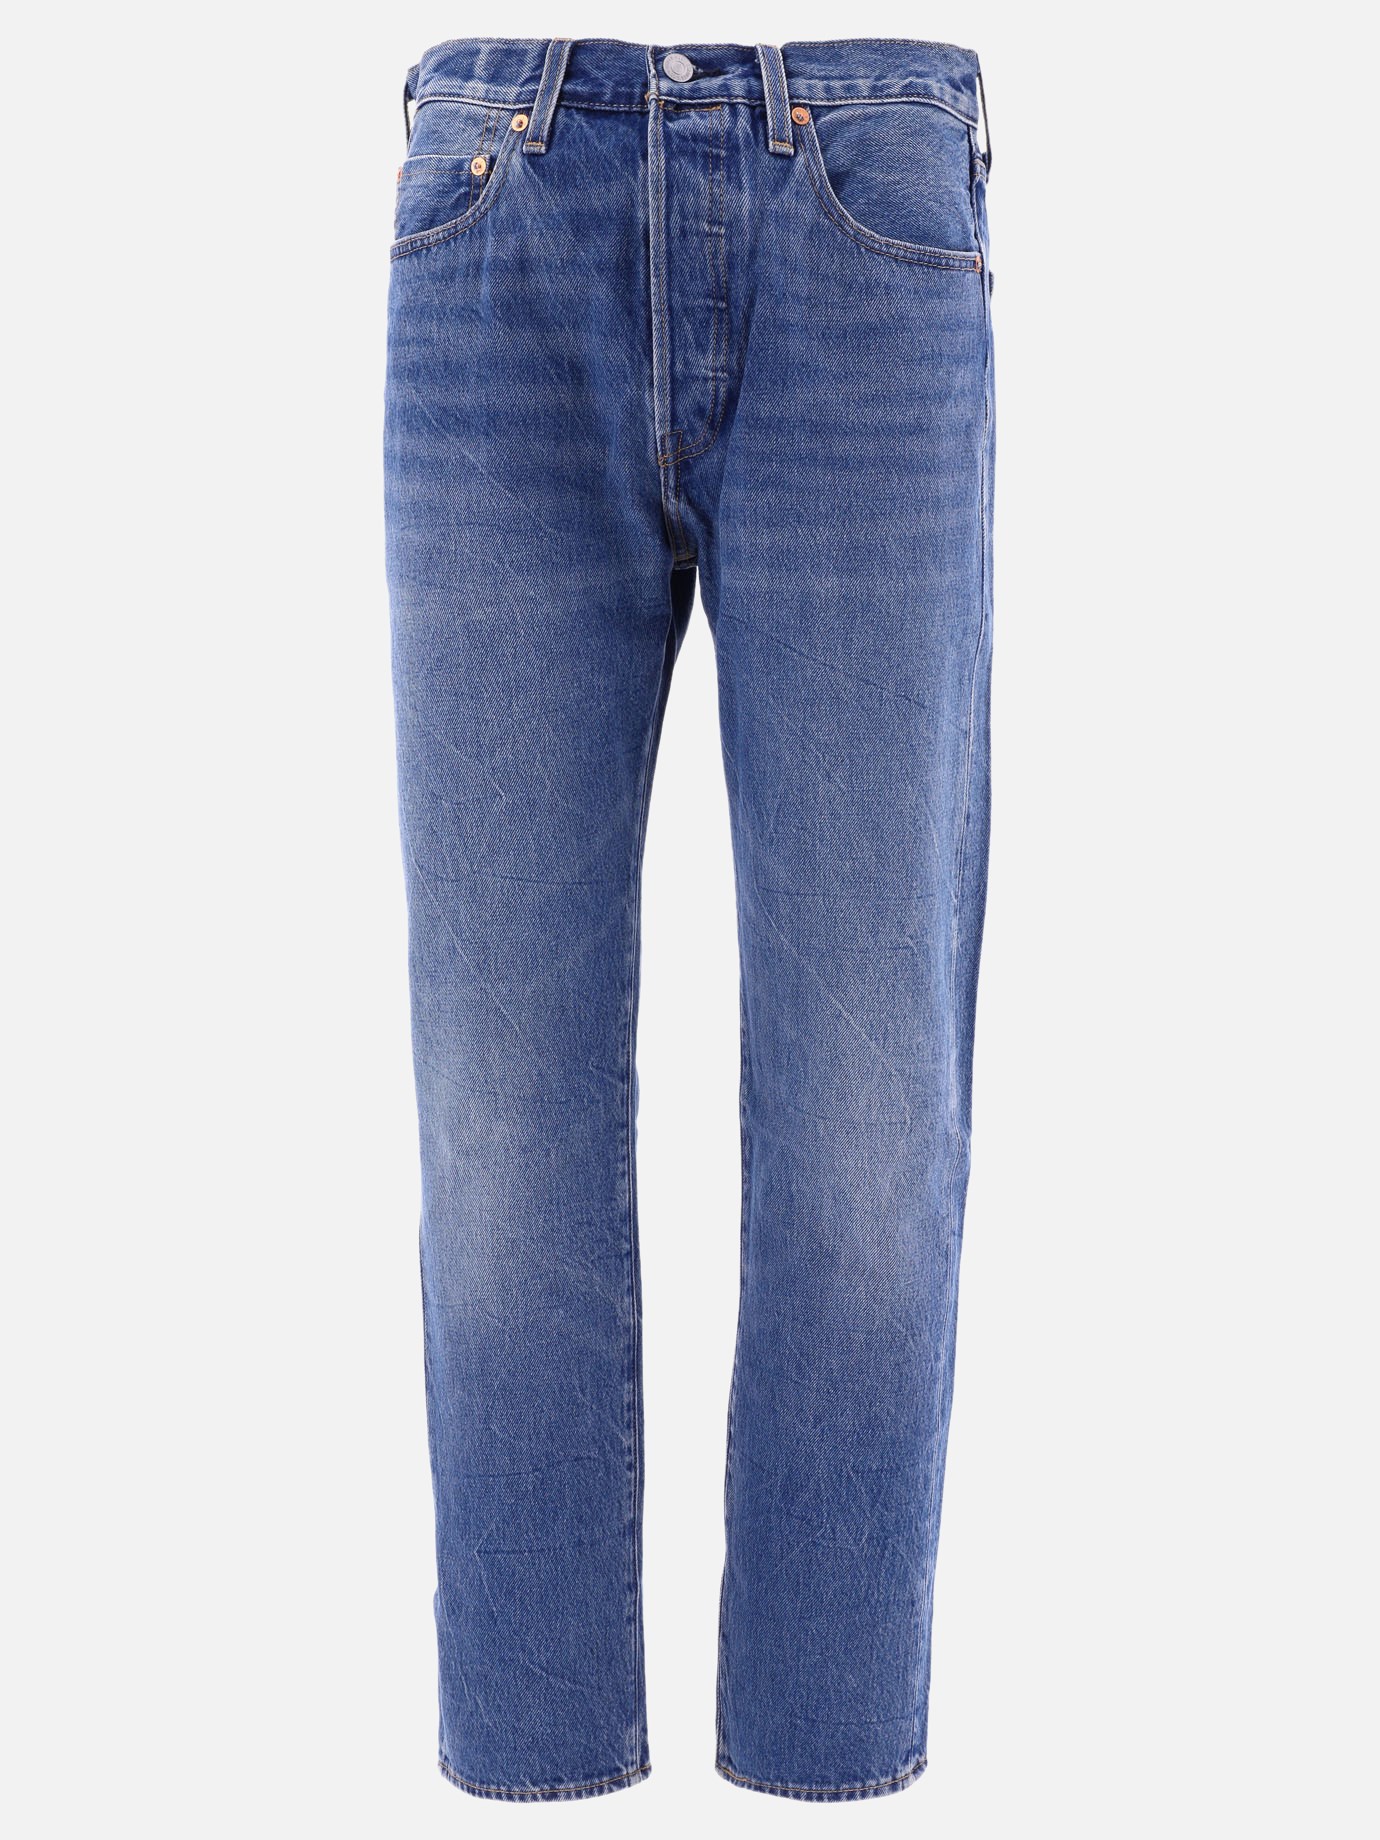 Jeans  501 1980s by Levi's Made & Crafted - 3